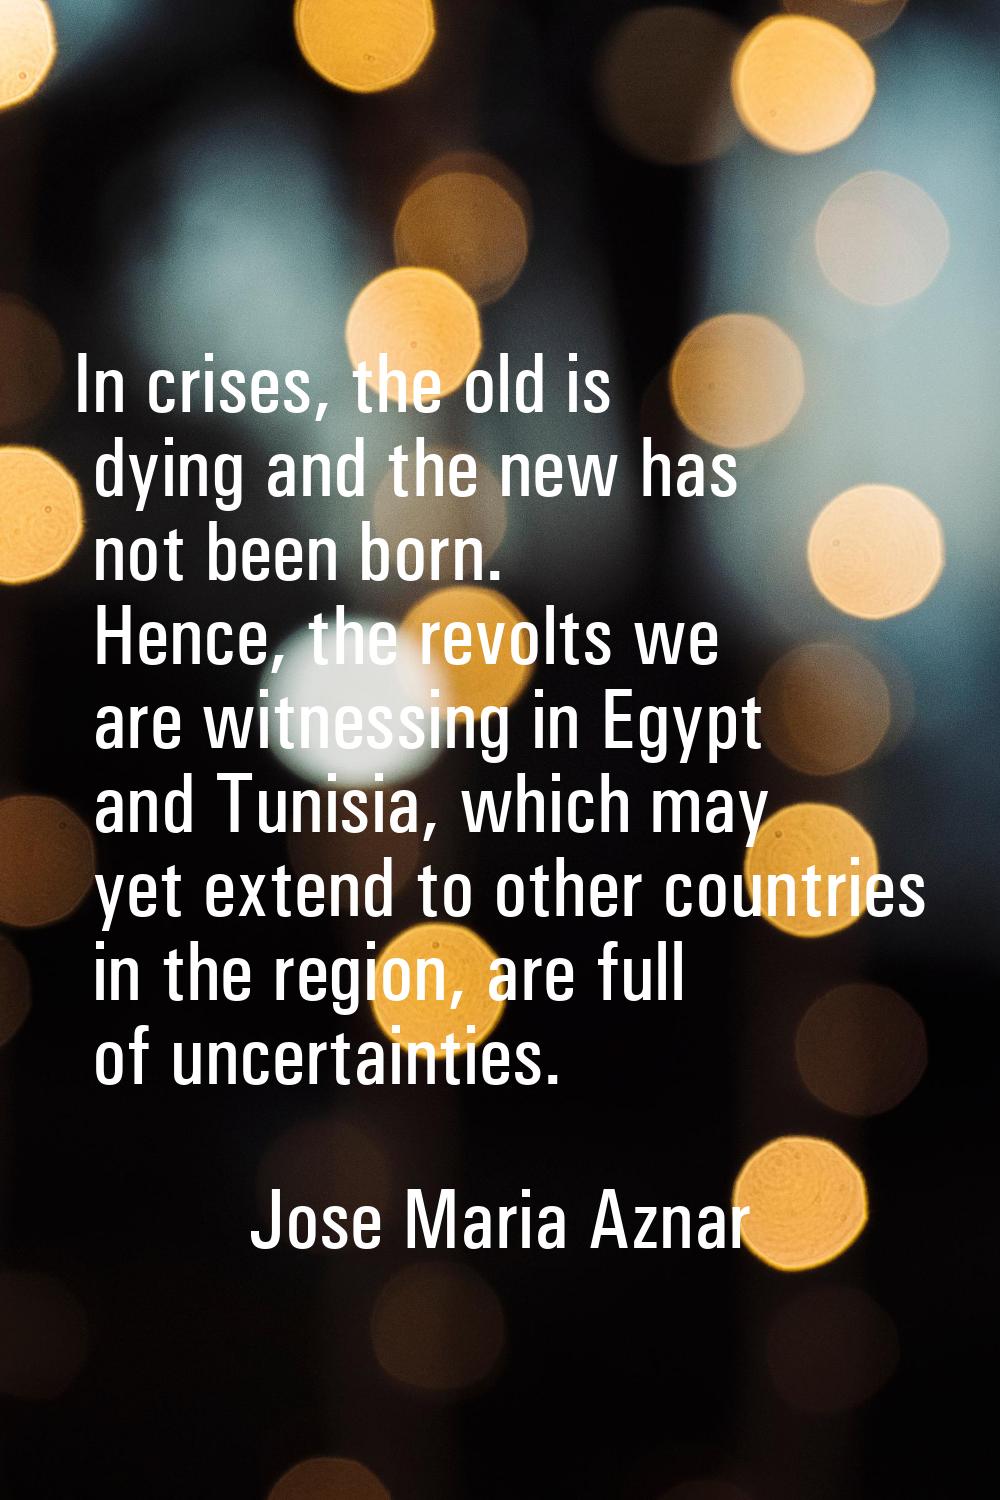 In crises, the old is dying and the new has not been born. Hence, the revolts we are witnessing in 